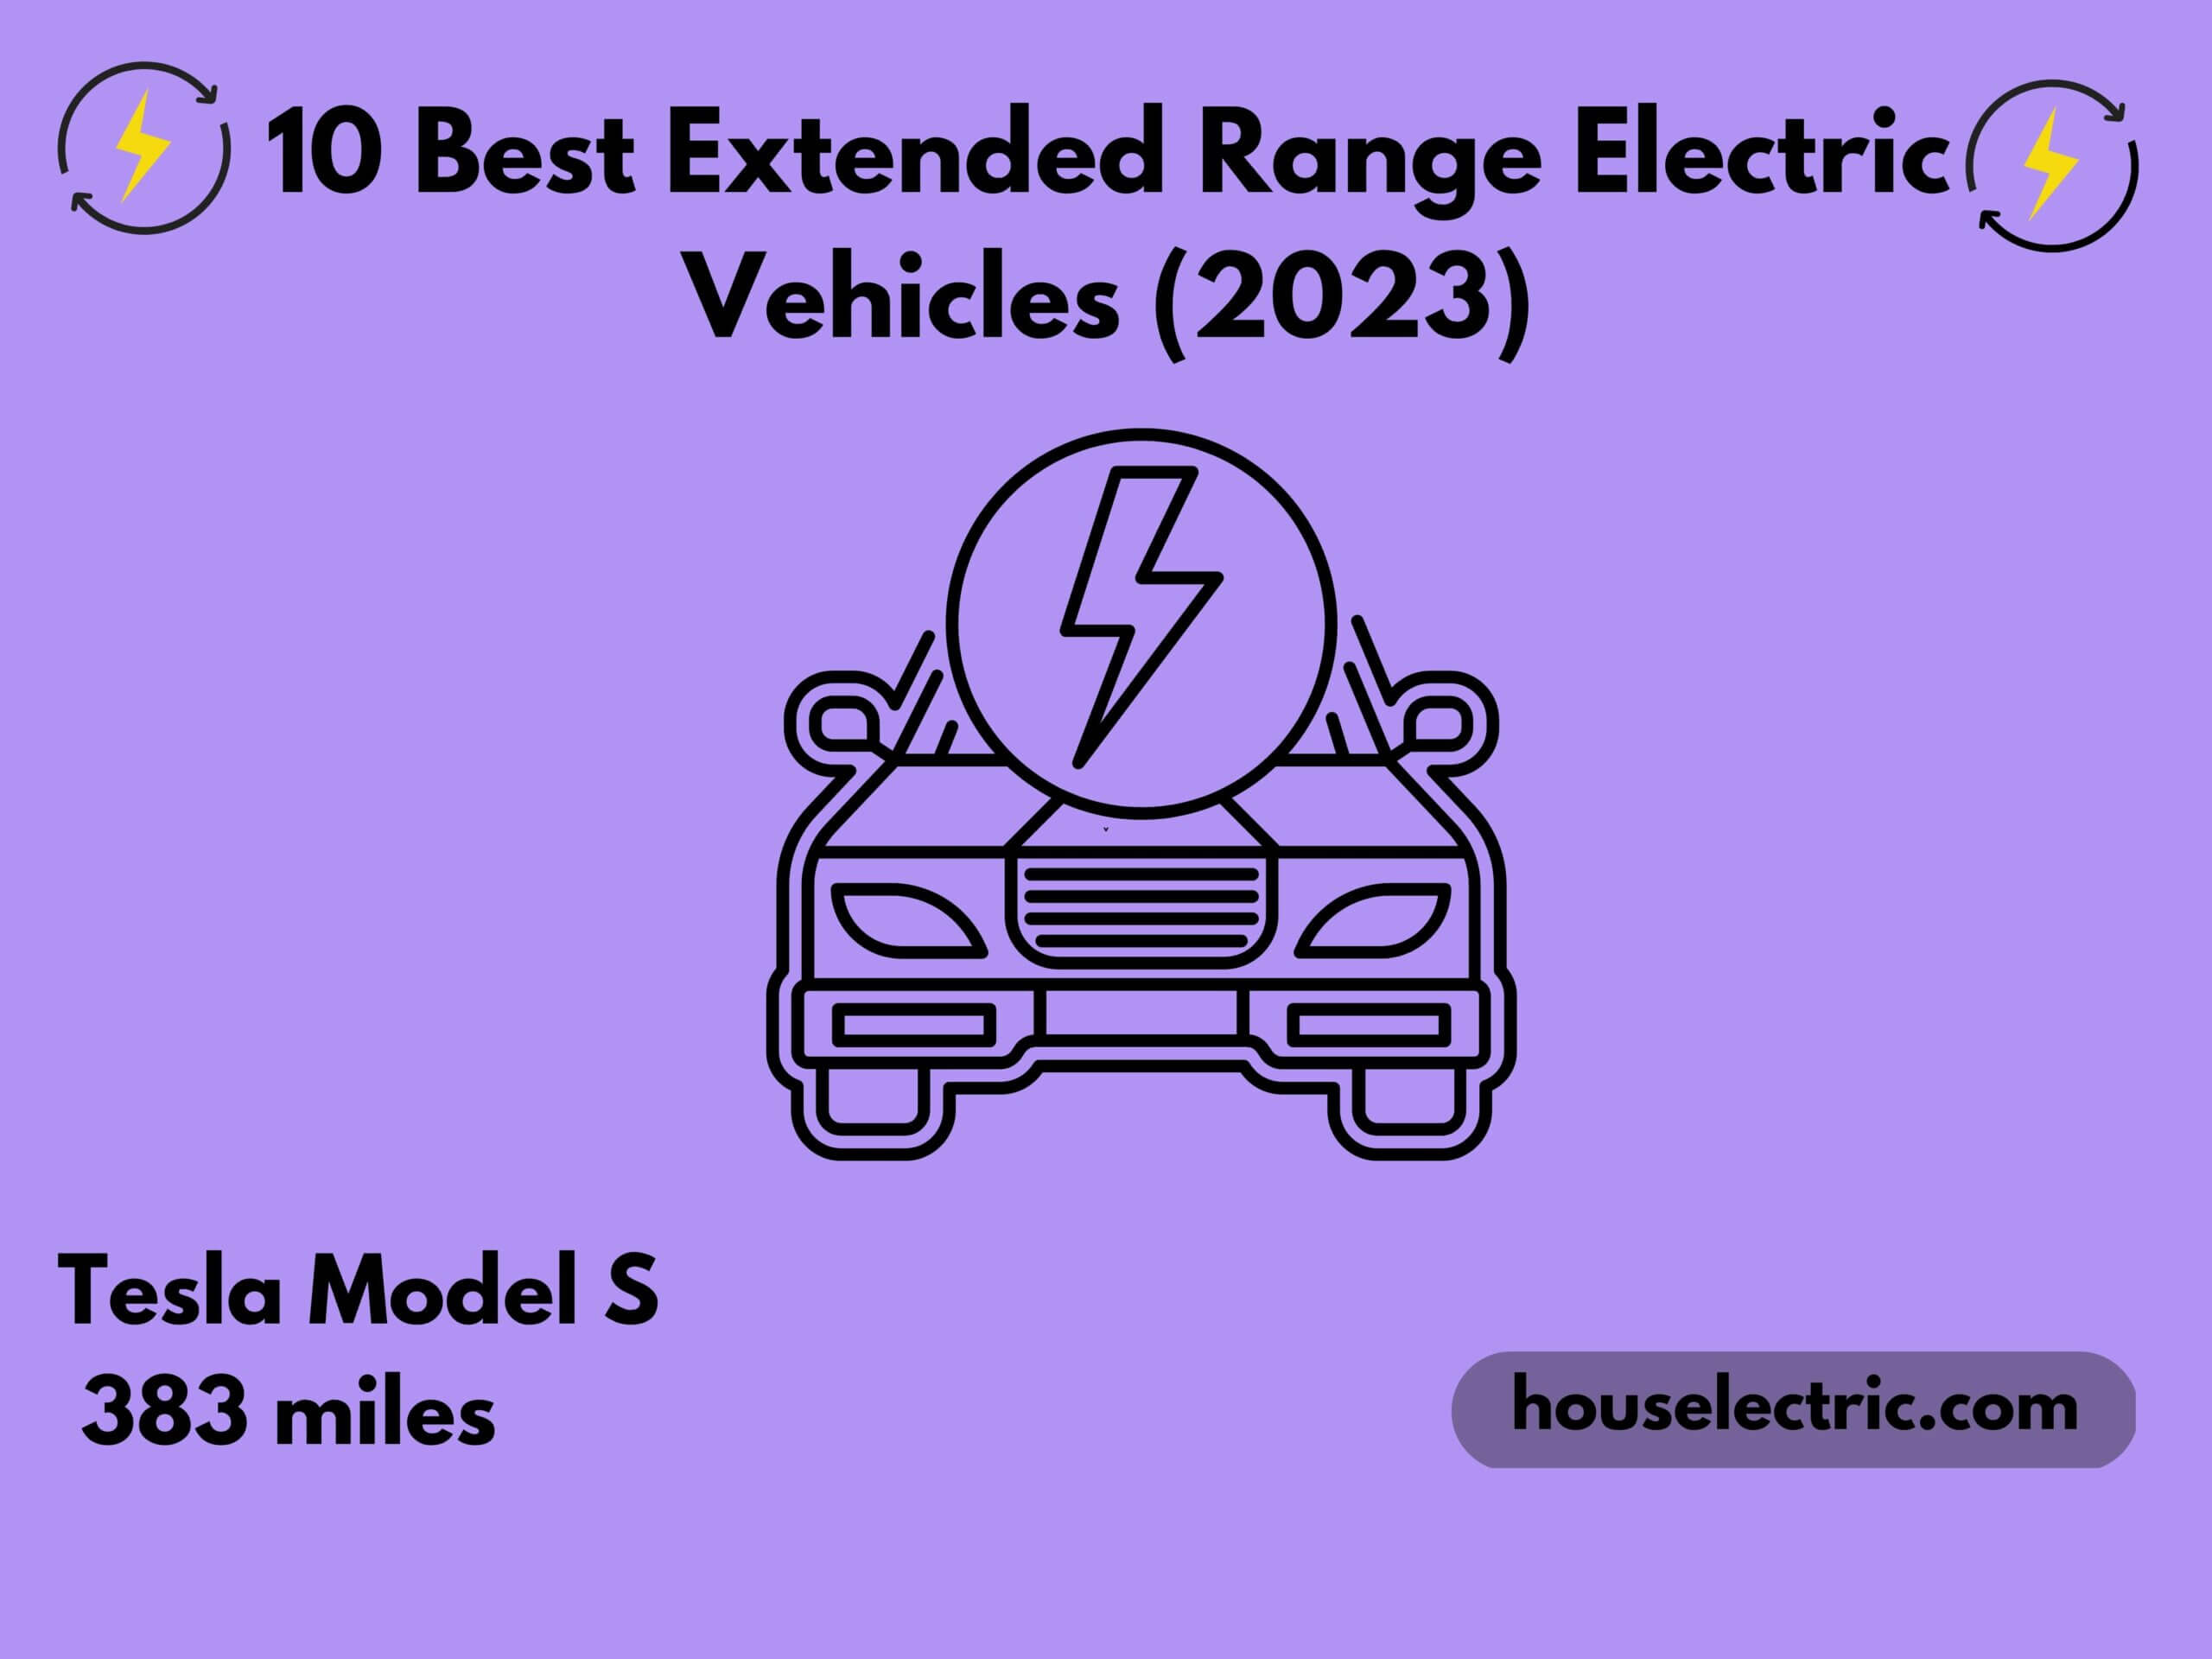 Extended Range Electric Vehicles